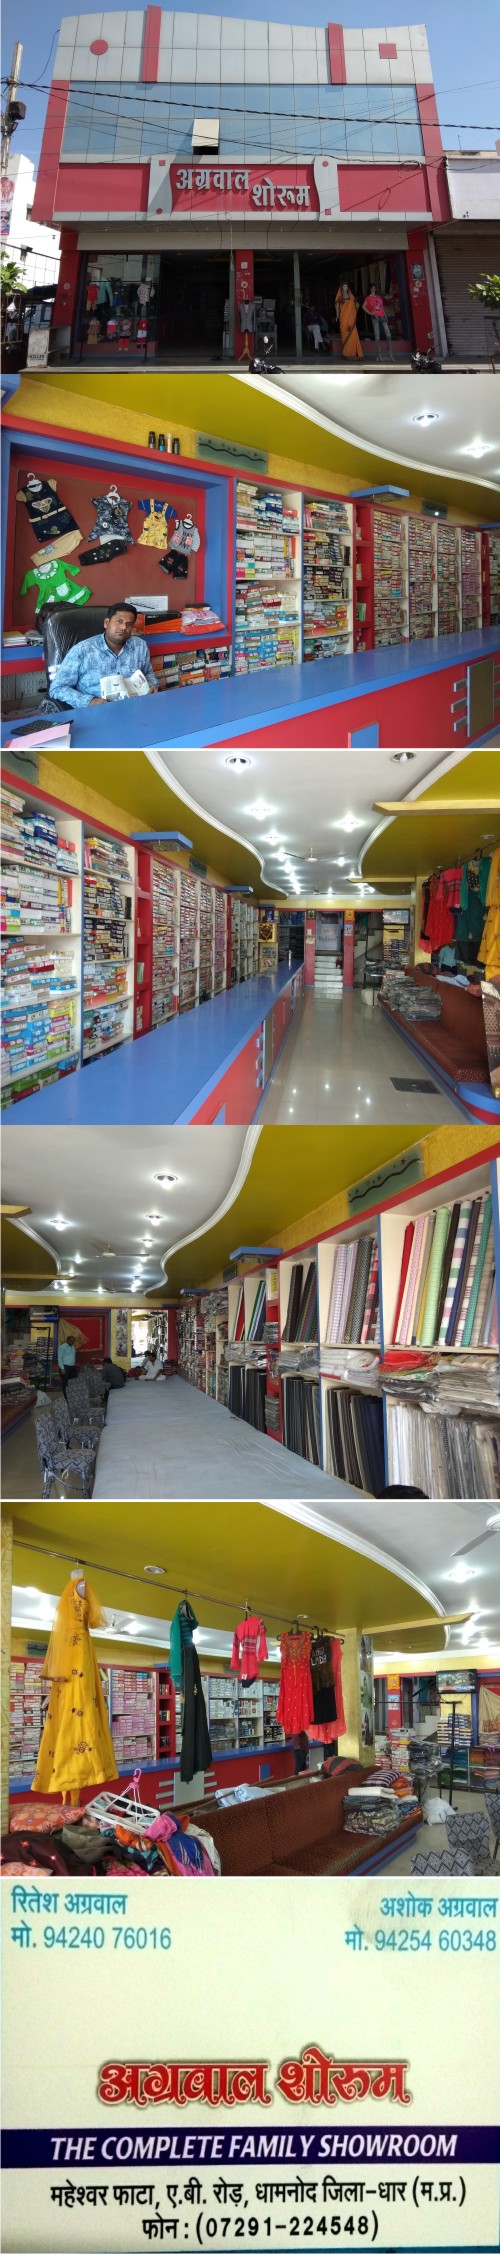 AGRAWAL SHOW ROOM